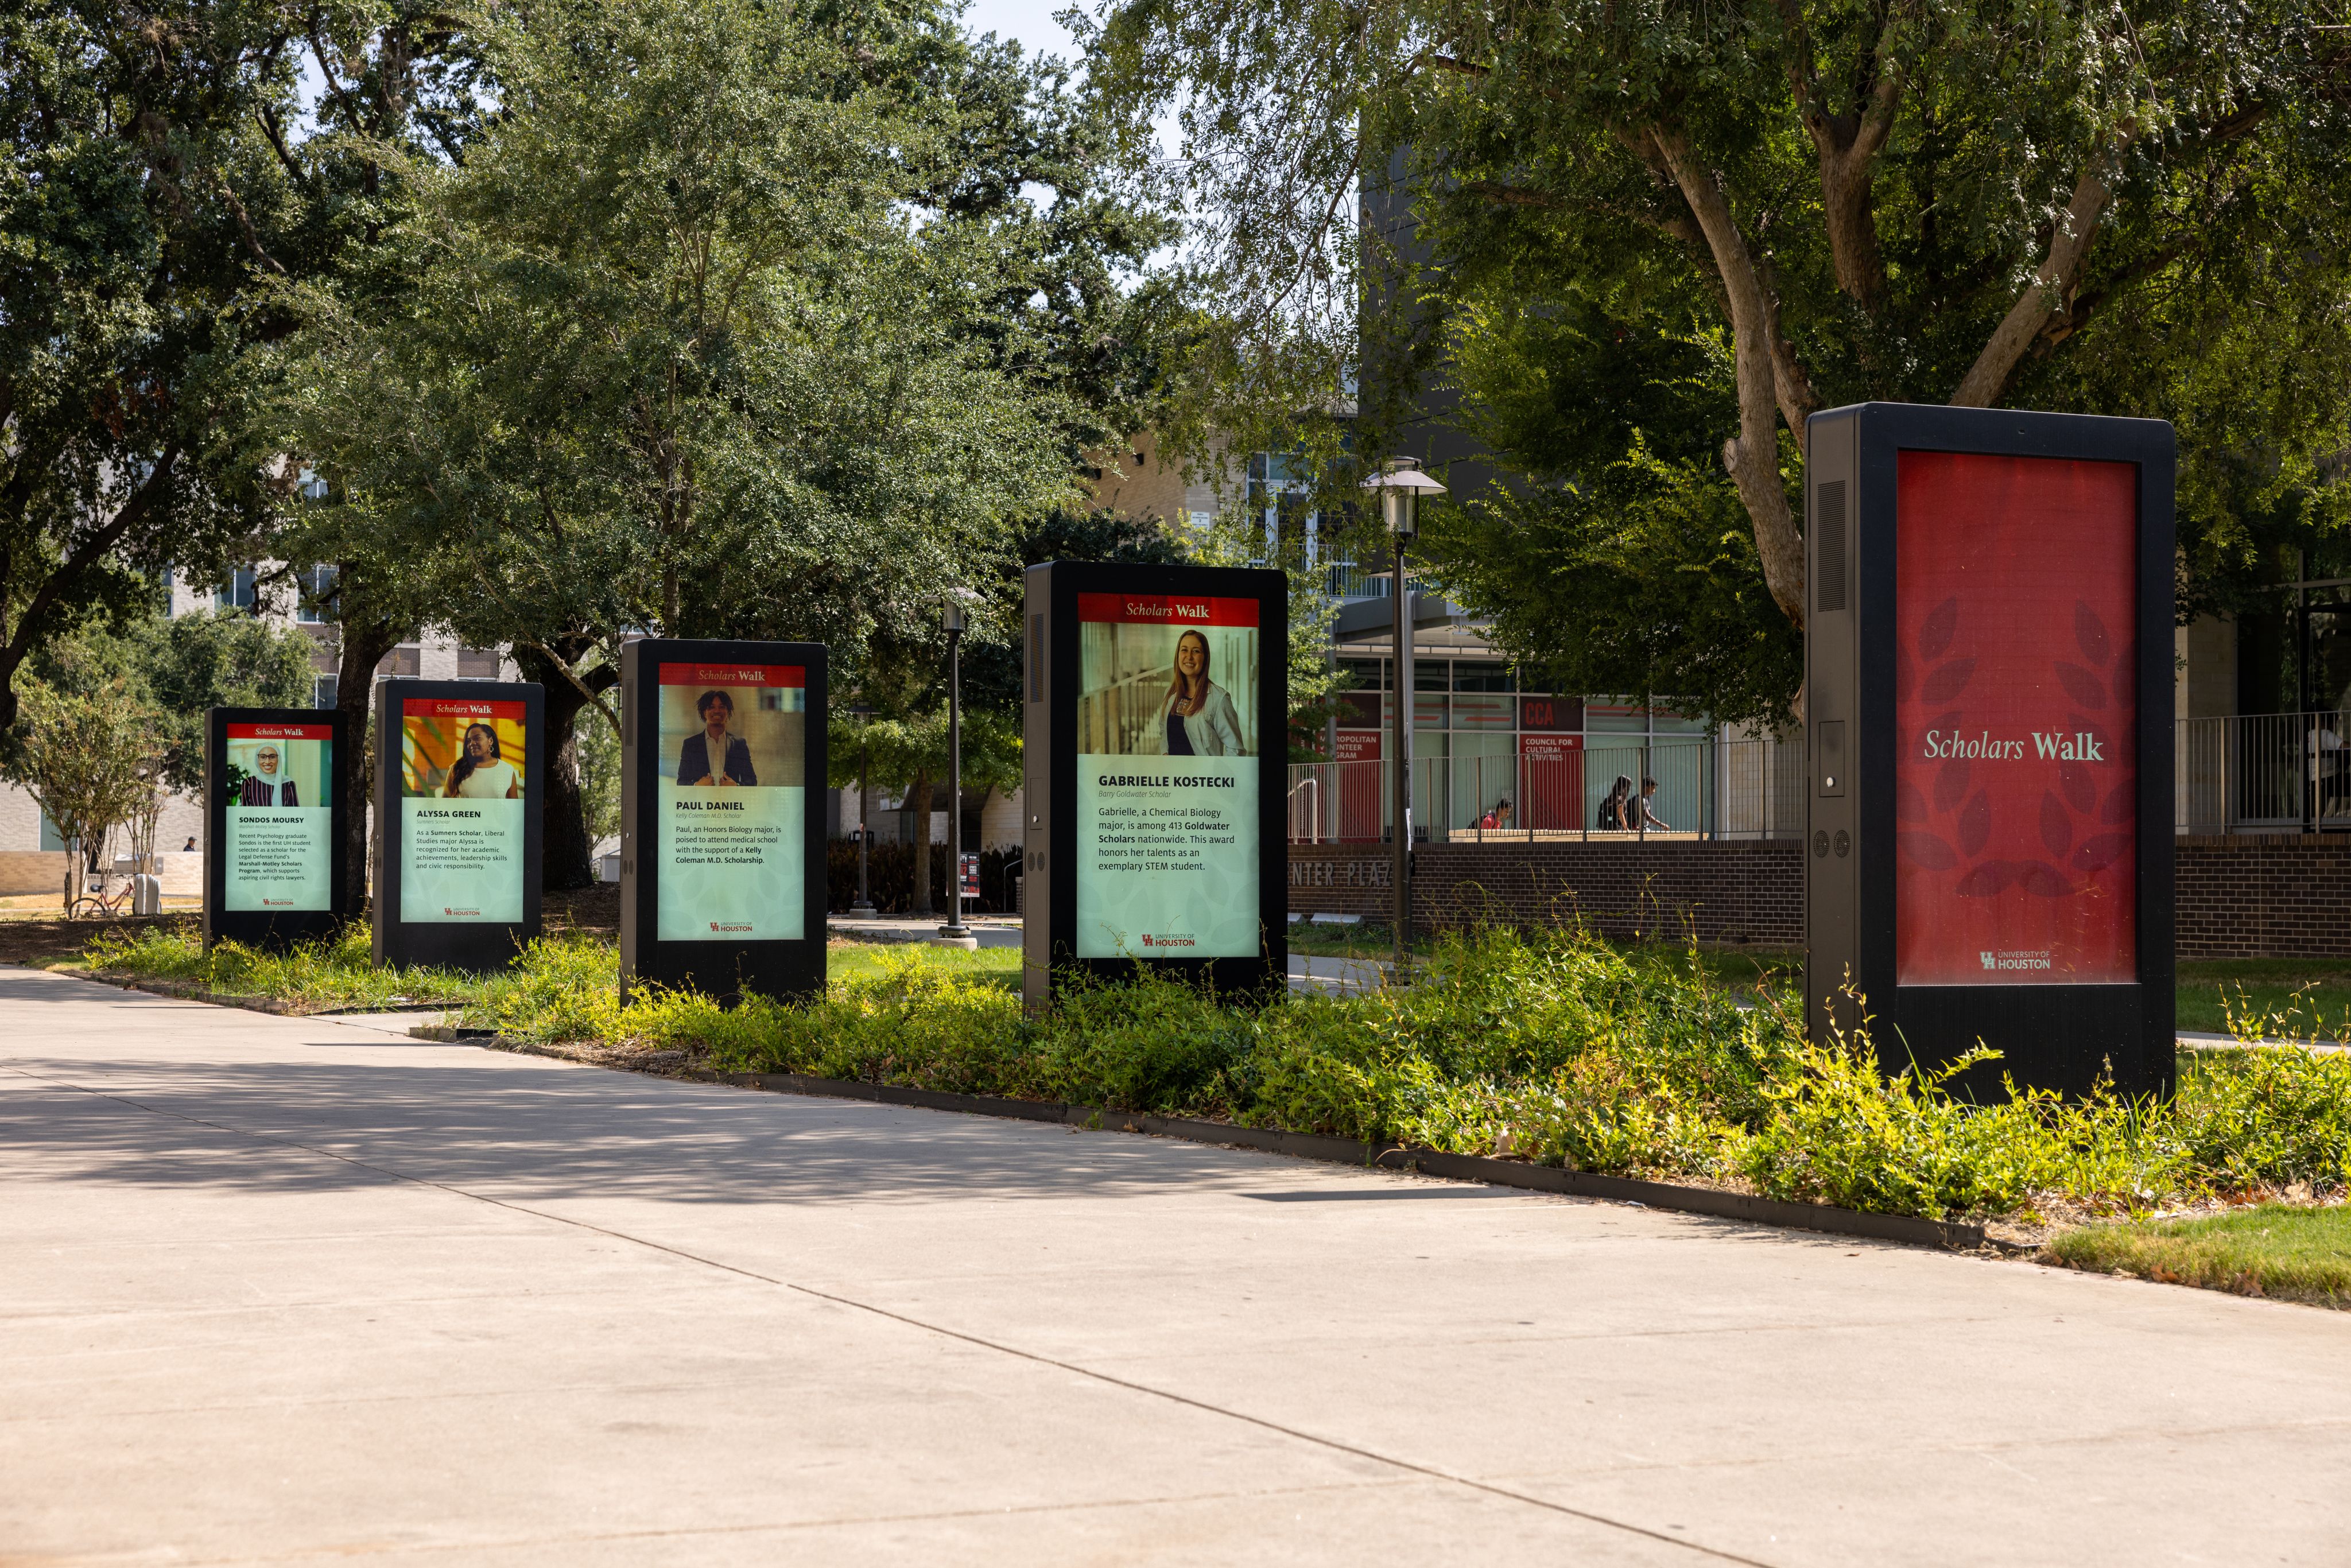 Series of video screens on college campus